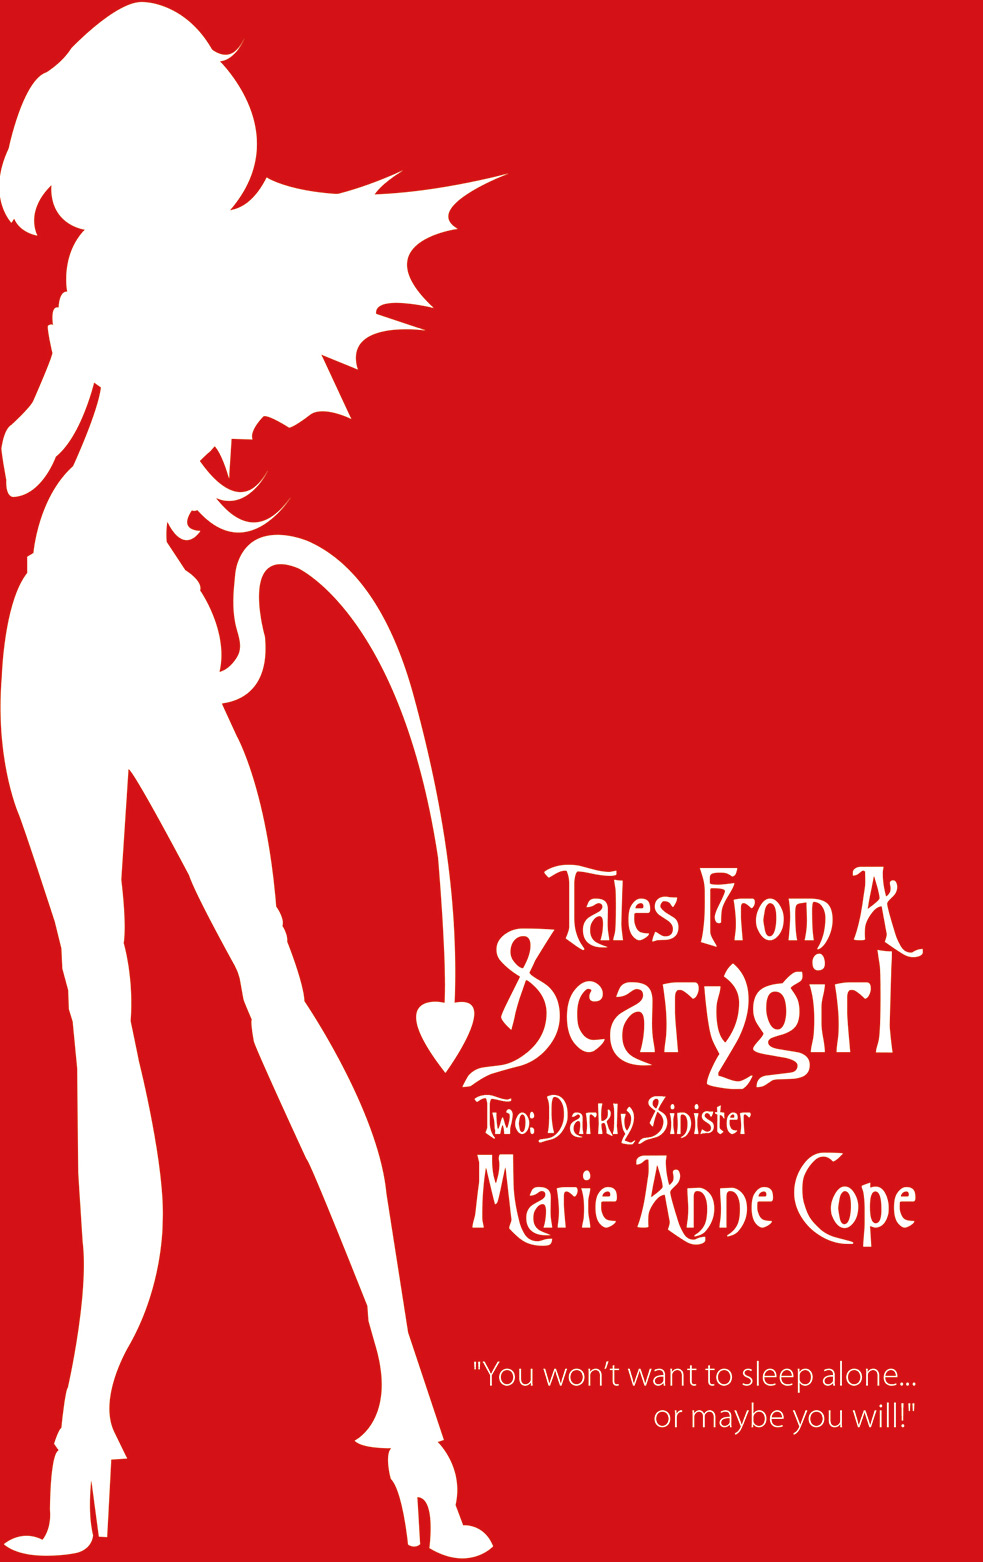 FREE: Tales From A Scarygirl Two: Darkly Sinister by Marie Anne Cope